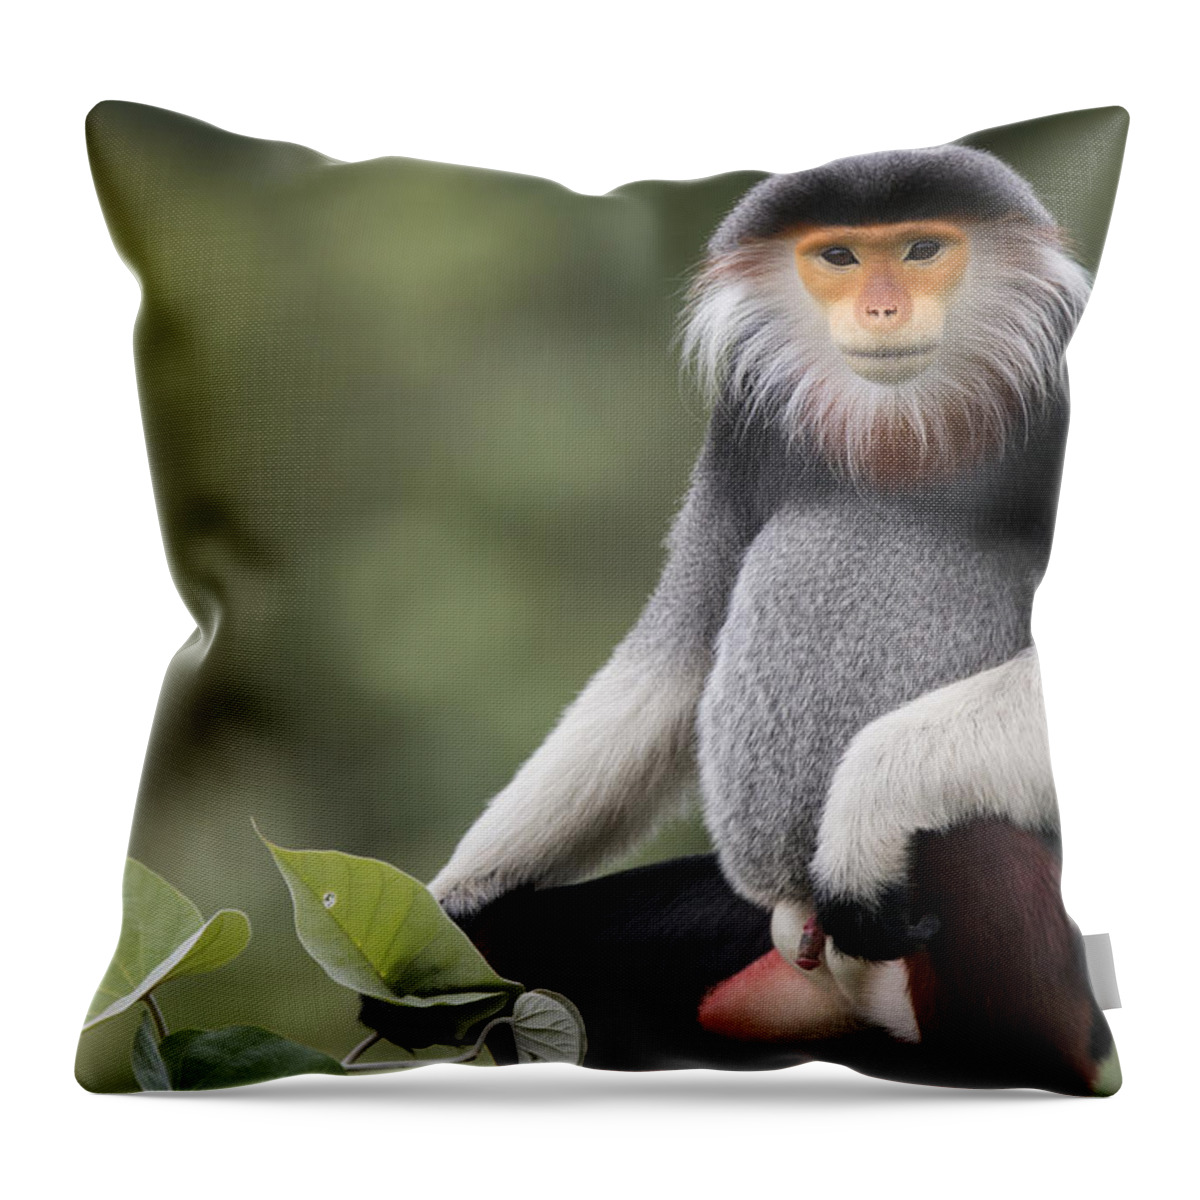 Cyril Ruoso Throw Pillow featuring the photograph Douc Langur Male Vietnam by Cyril Ruoso